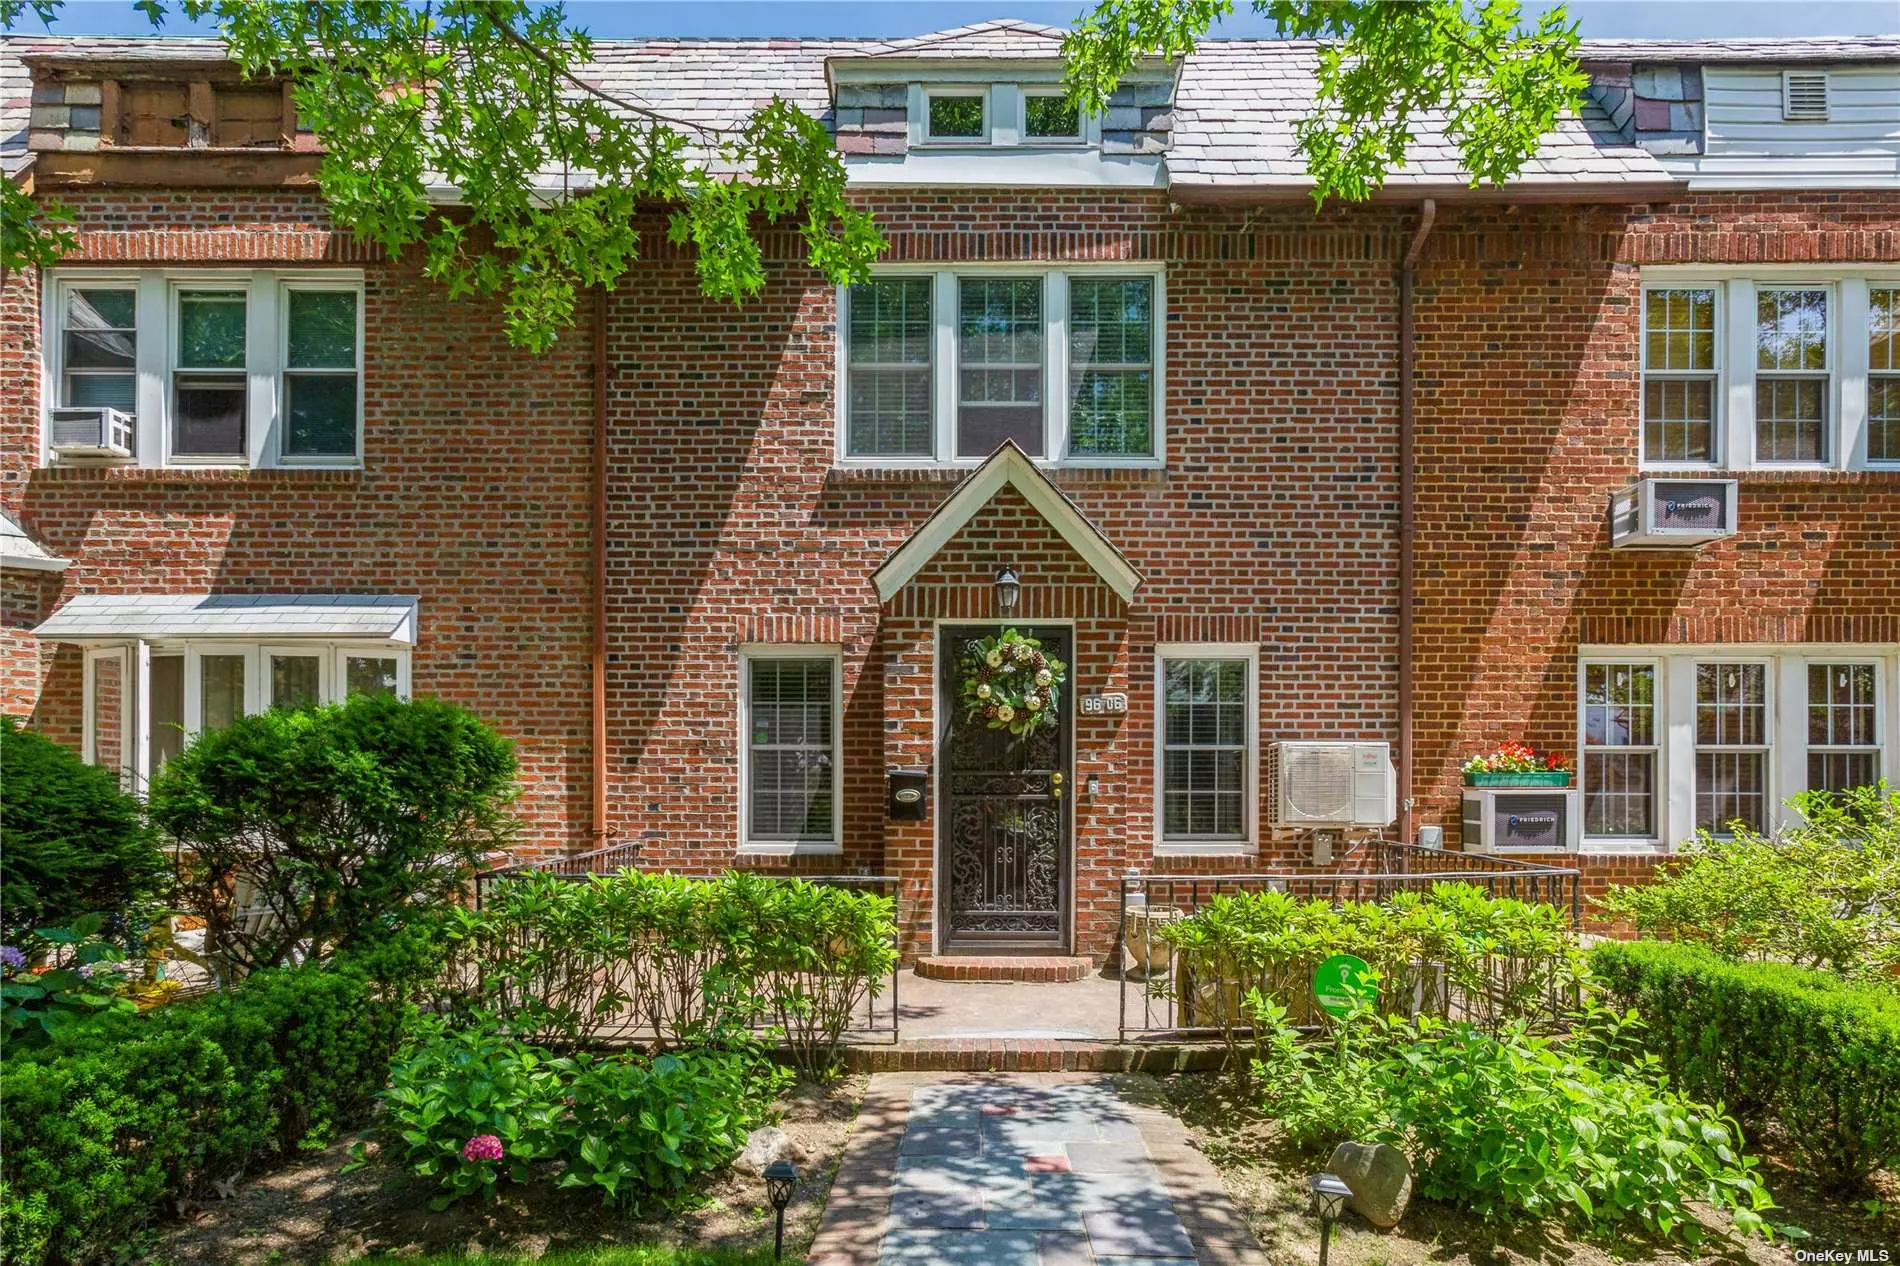 20&rsquo; wide brick townhouse in the heart of Forest Hills. Gut renovated, new floors, roof, walls, raised 8&rsquo;6 ceilings on first floor. 9&rsquo; ceilings on second floor, new plumbing, electric, Pella windows, Navian thankless gas boiler, 2 private parking spots, large 18&rsquo; X 20&rsquo; deck. 6 split units for heating and cooling. 3 bedrooms, 3.5 bathrooms, finished walk out basement w/sep entrance. Custom kit w/stainless steel apps. Double oven, hood, double door frig, in drawer microwave, farm sink. Primary bedroom has W.I.C. & bath w/rain head shower and heated flrs. Hallway bath has jacuzzi tub, electronically controlled skylight with rain sensor to close automatically and heated flrs. 2 additional bedrooms w/closets, Living room, Dining room with sliders to rear deck, half bath, Combo kitchen w/Quartz island. Bsmnt has family room, guest bed, full bath w/heated flrs, laundry, storage, boiler, 4 blocks to tennis stadium, 2 block to shopping, 4 blocks to P.S. 144, 7 blocks to LIRR, 8 blocks to subway on 71st Ave